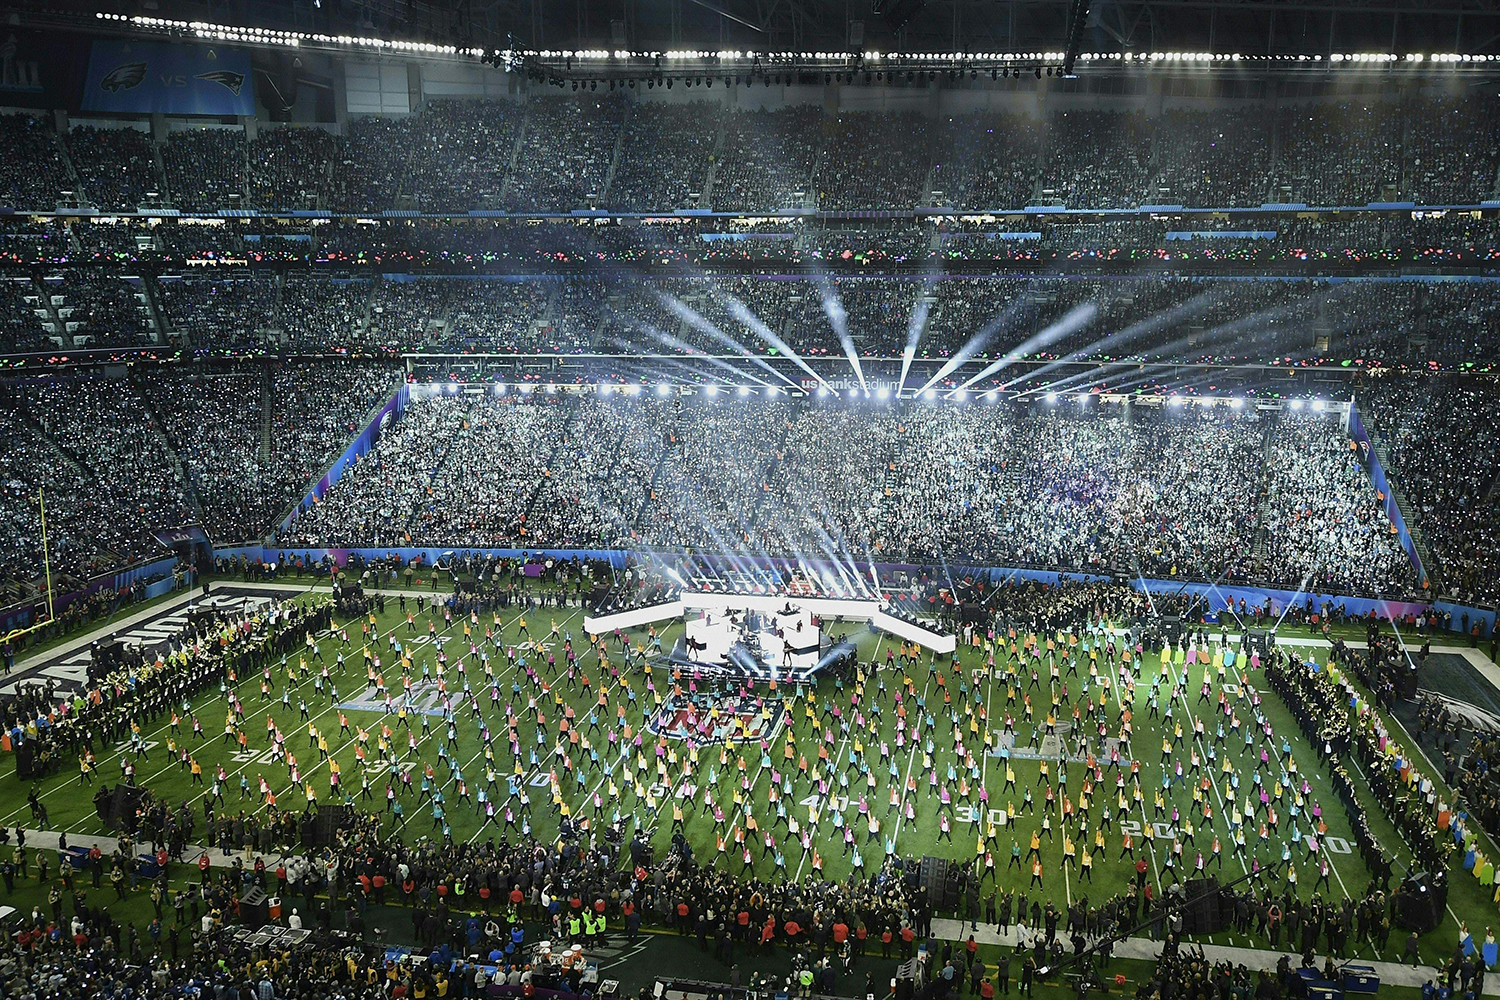  When is Super Bowl 2021? Date, Time, Location, and Latest News